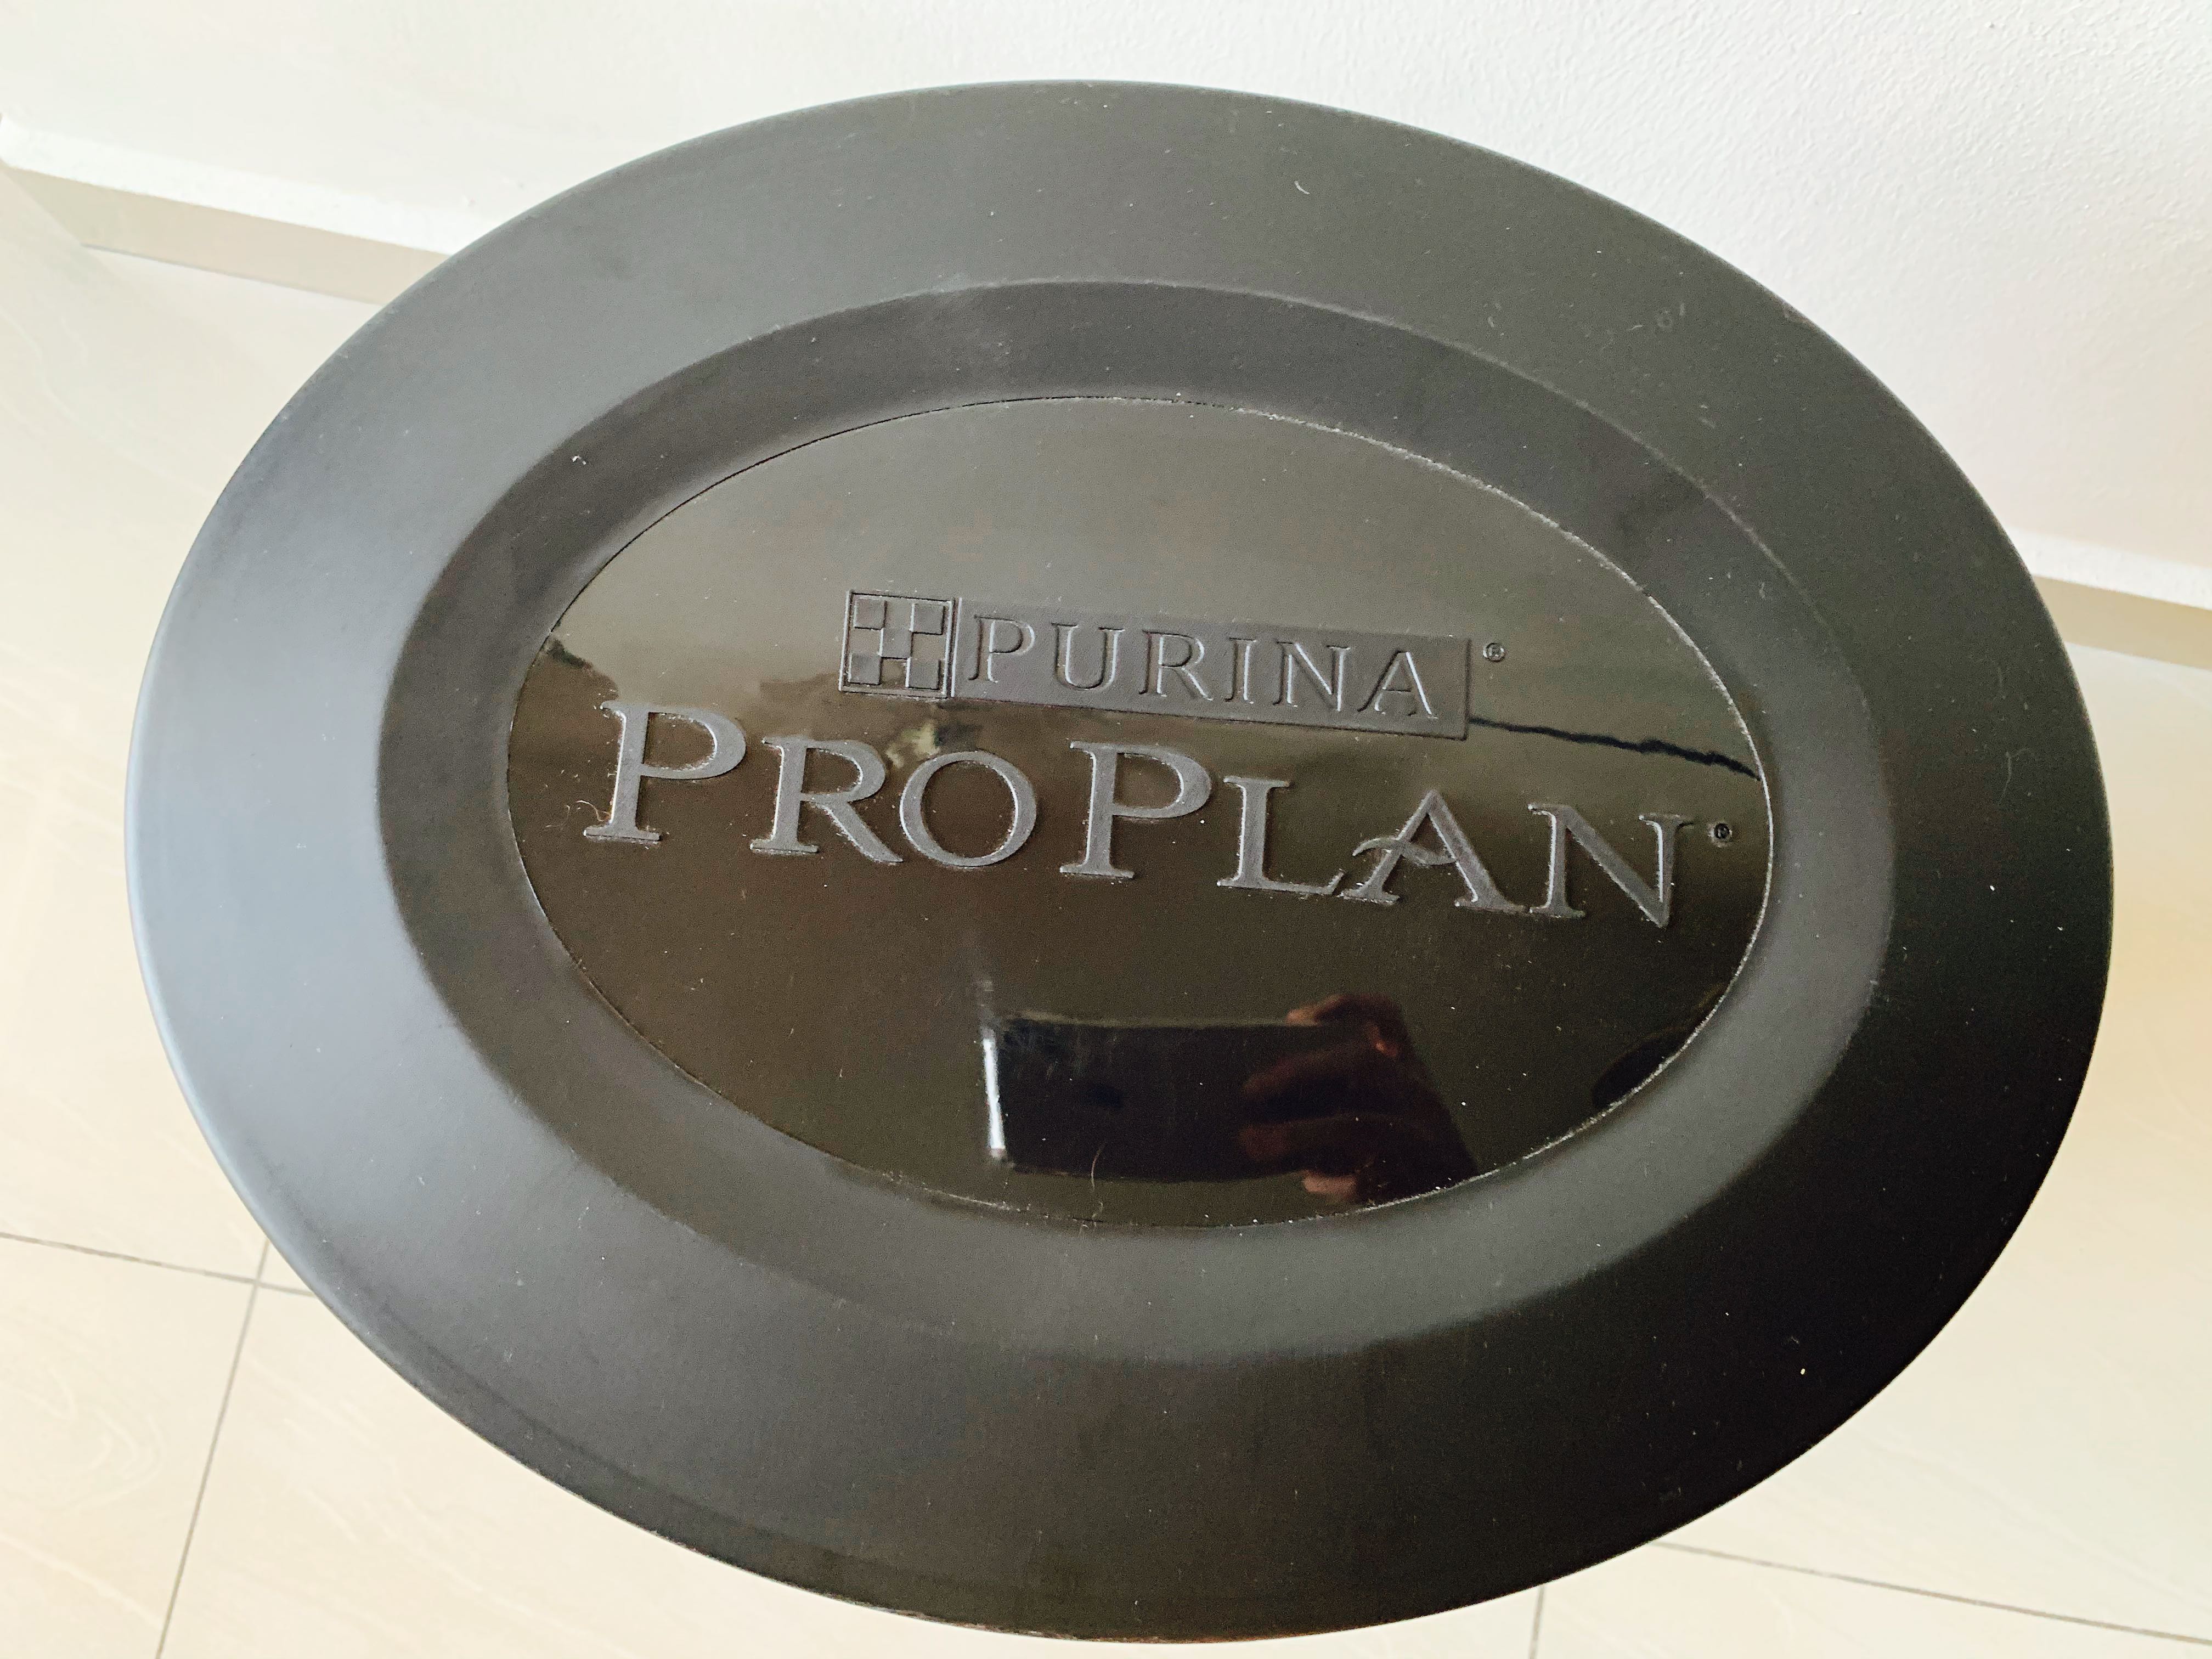 Purina Proplan Pet Food Storage Box  Container